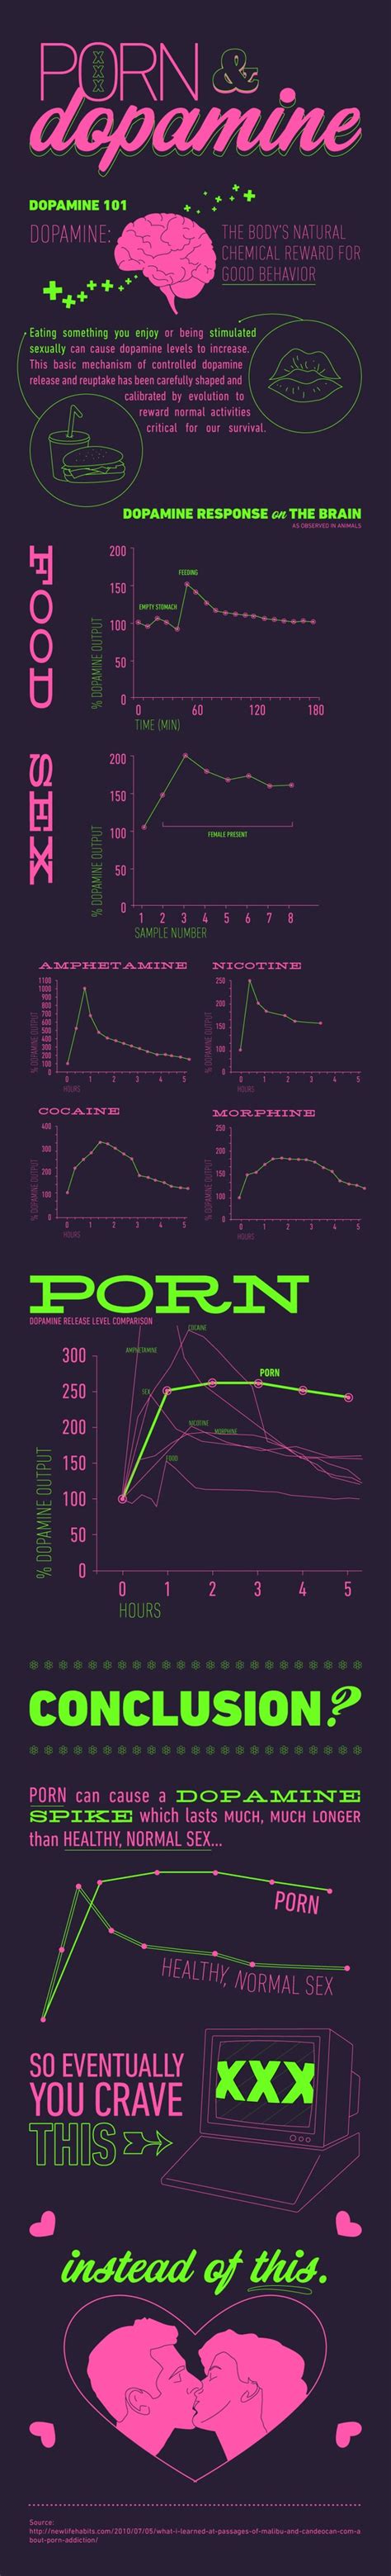 Porn Viewing Effects On Dopamine Levels Infographic Directory Com